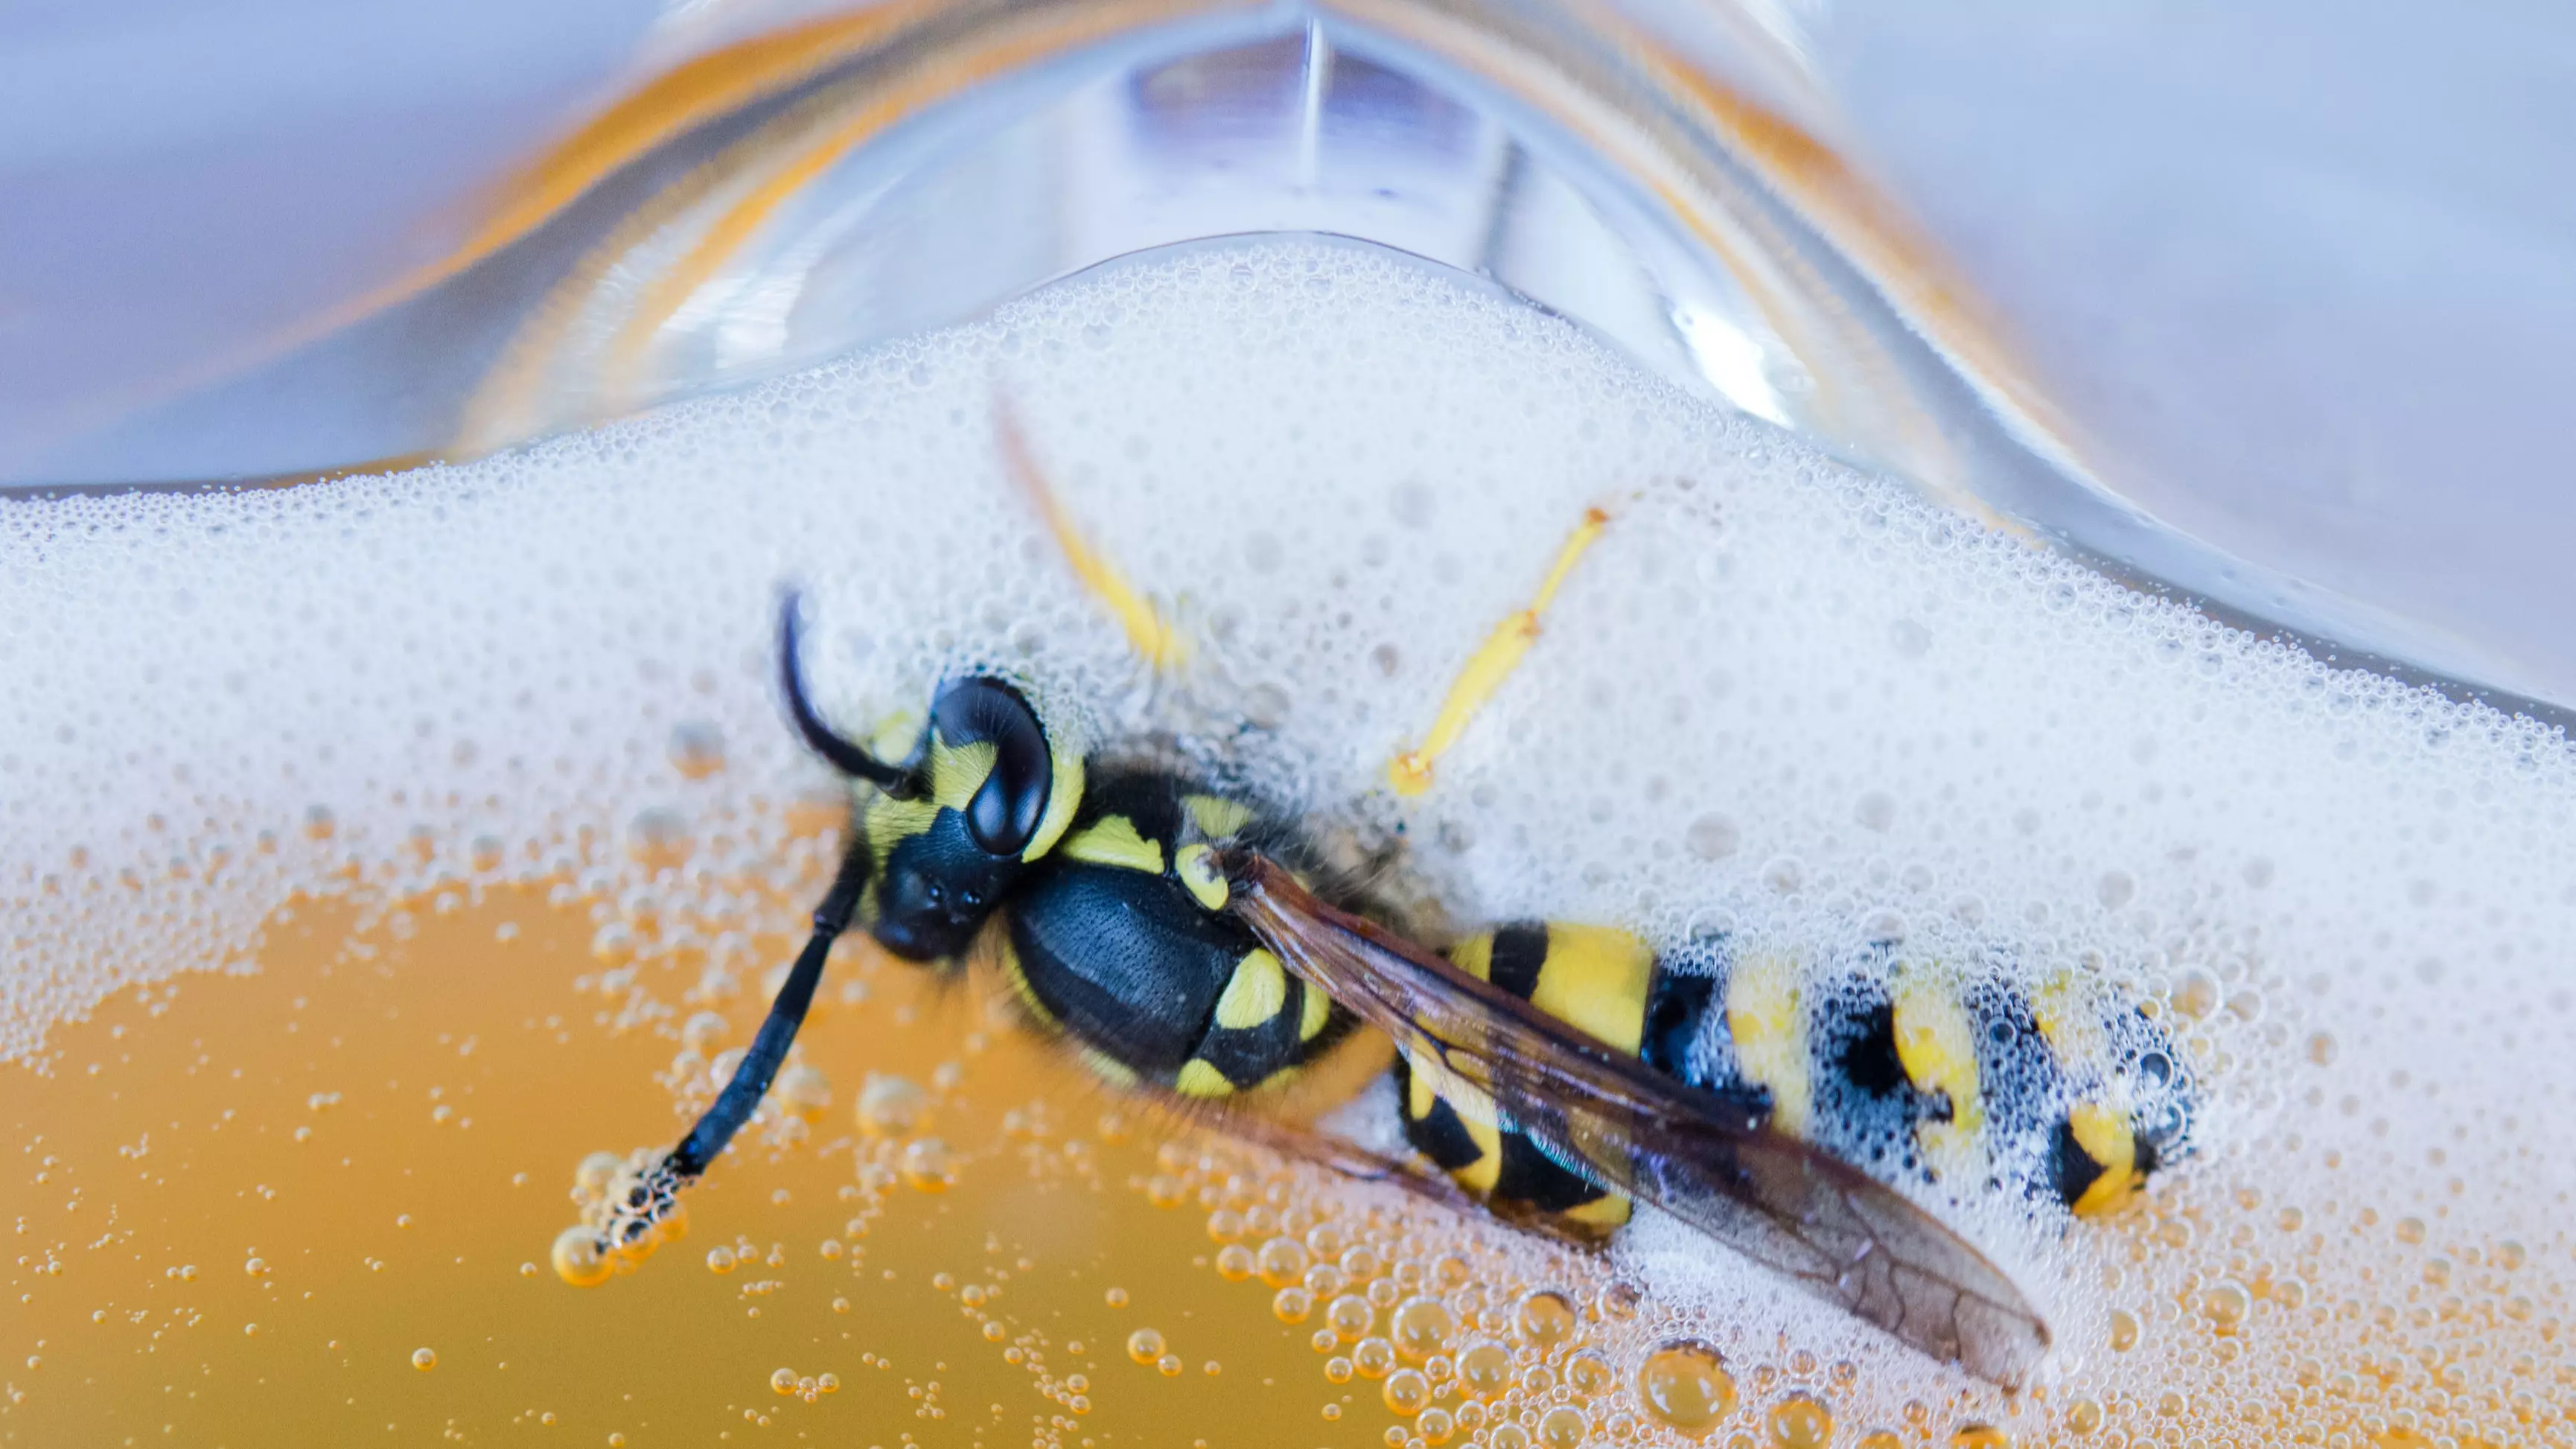 The Wasps That Are Annoying You Are Drunk, Say Wildlife Experts